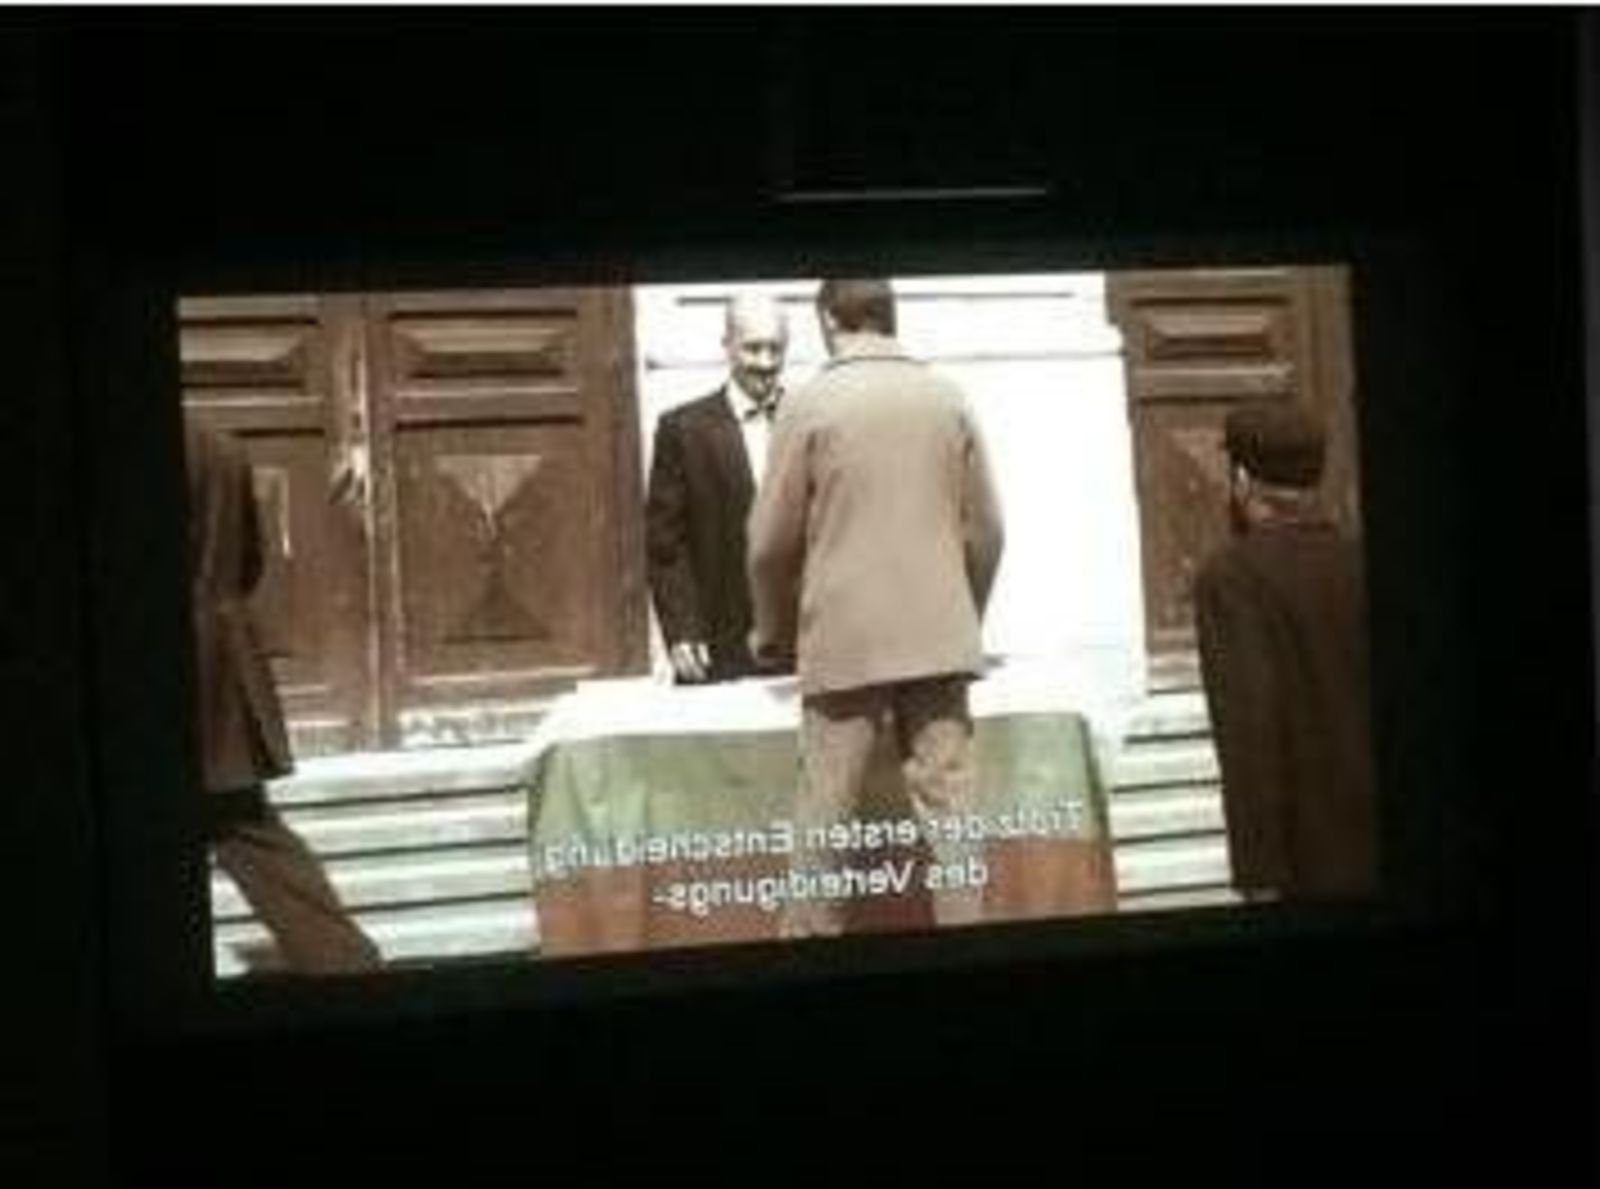 A Night Dedicated to the Swiss-Bulgarian Pedagogue and Public Figure Louis Eyer Was Held in Bern with a Projectionf of the New Bulgarian Documentary about Him